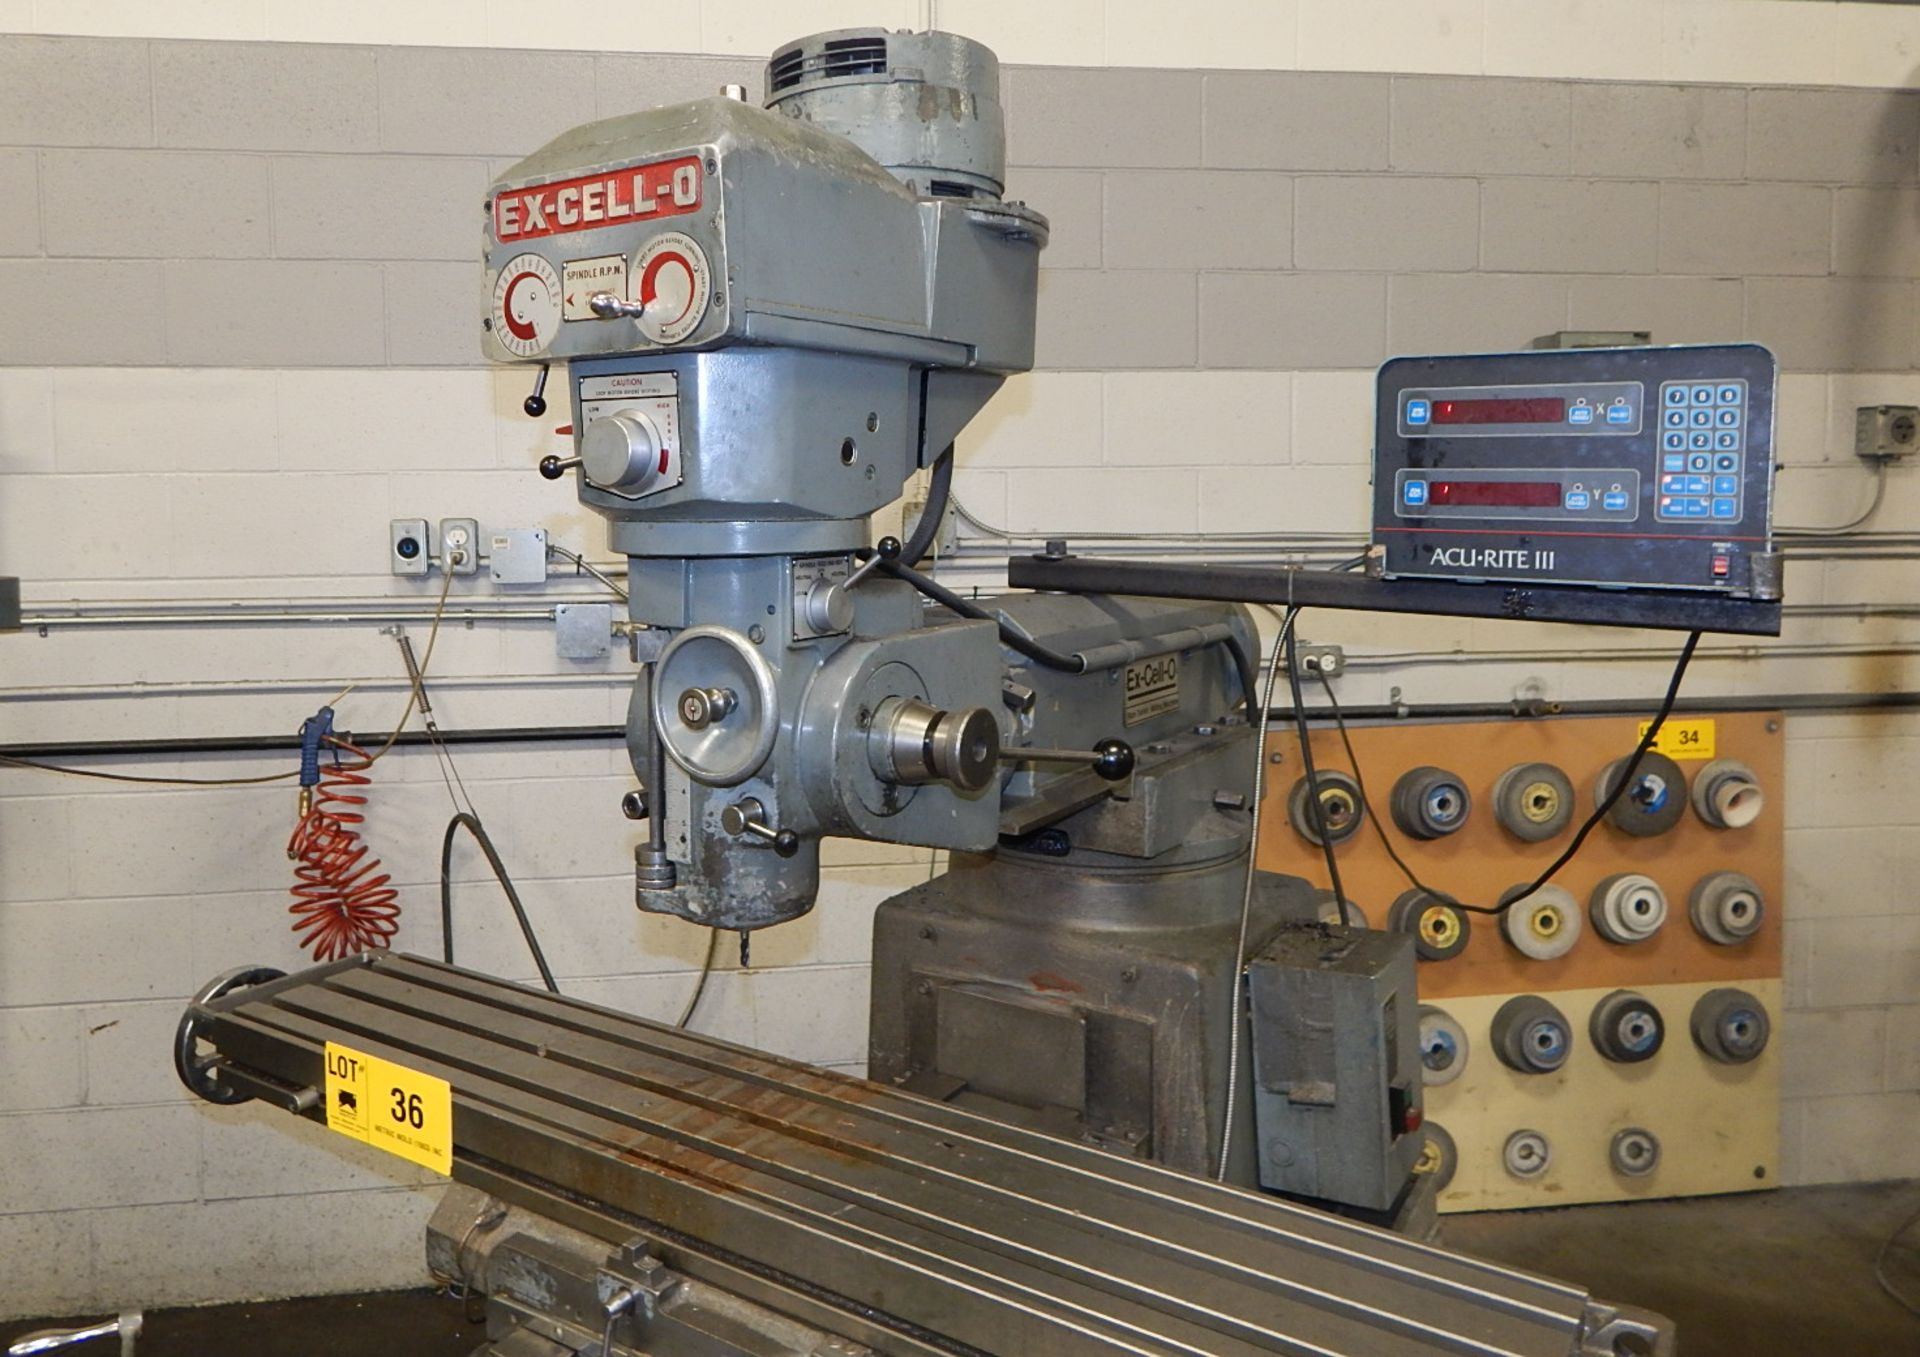 EX-CELL-O MODEL 602 VERTICAL TURRET MILL WITH 48"X9" TABLE SPEEDS TO 4000 RPM, ACCURITE III 2 AXIS - Image 2 of 3